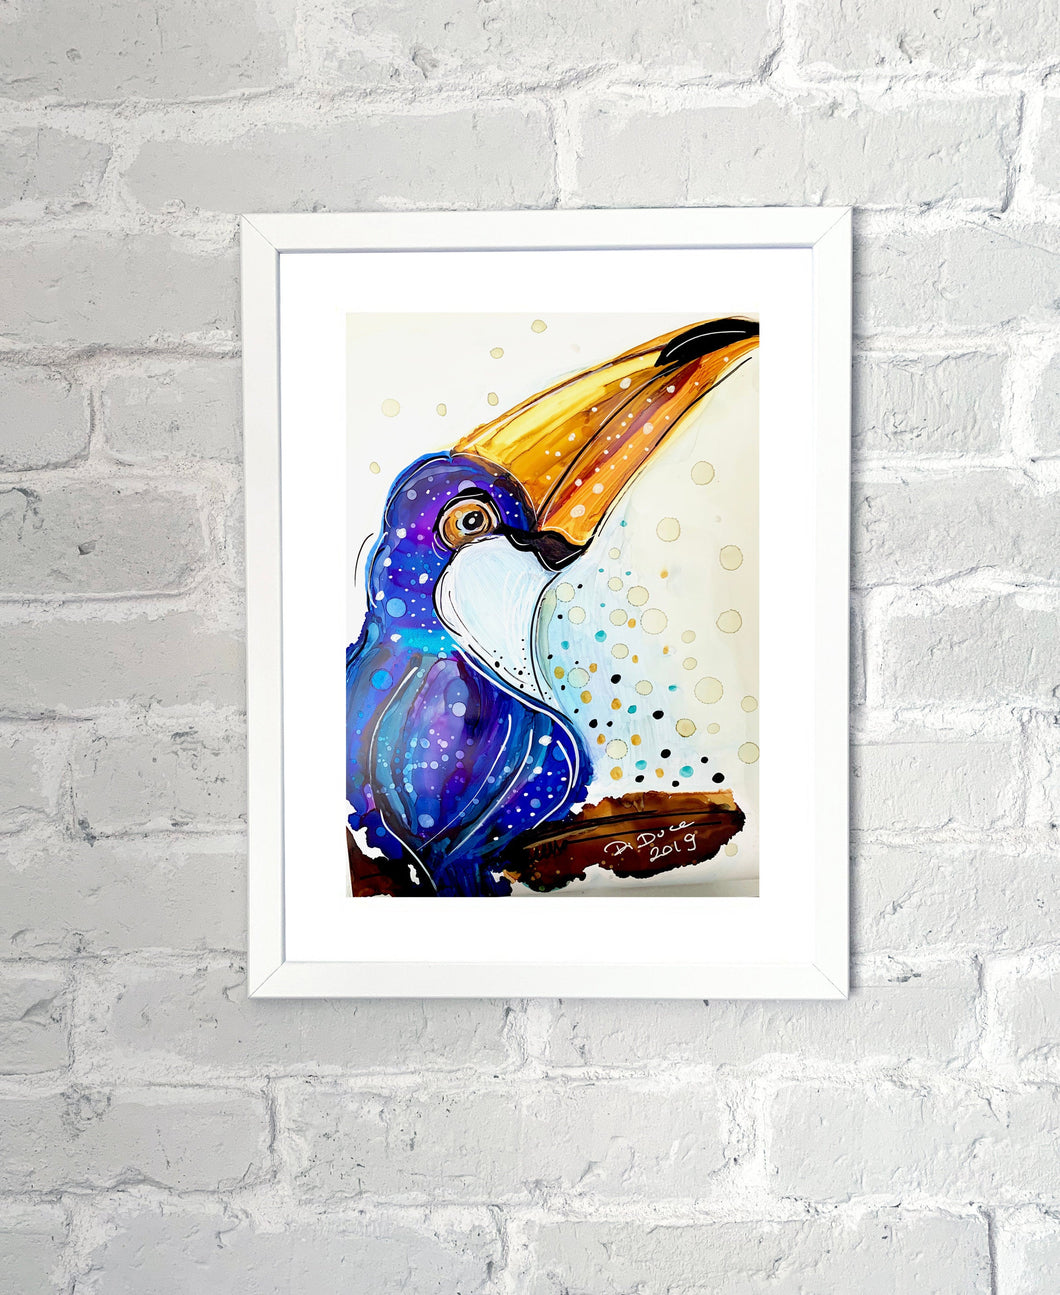 Guinness time? Let's ask the toucan - Alcohol Ink Painting on Yupo Paper